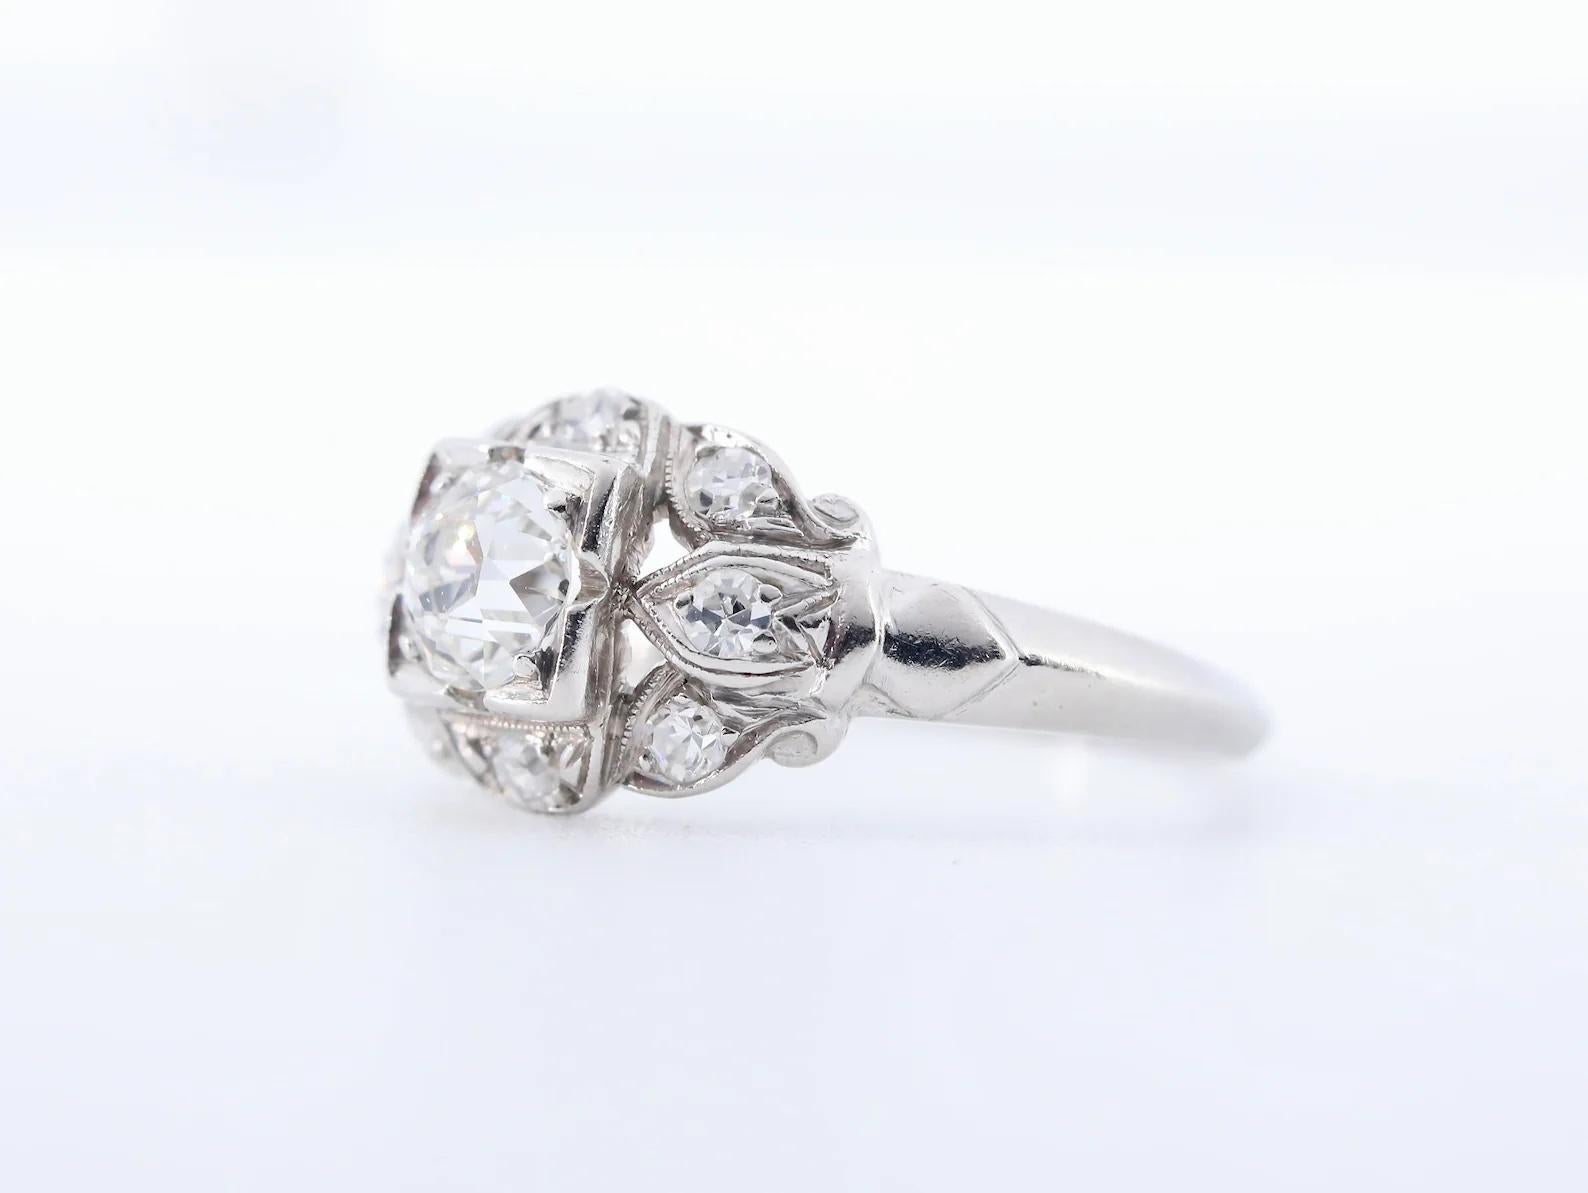 A handmade late Art Deco period diamond engagement ring in platinum.

Centered by a 0.60 carat old mine cut diamond, and framed by an additional eight pave set diamonds of 0.16ctw.

The diamonds all of G/H color, and VS clarity.

Hallmarked, and